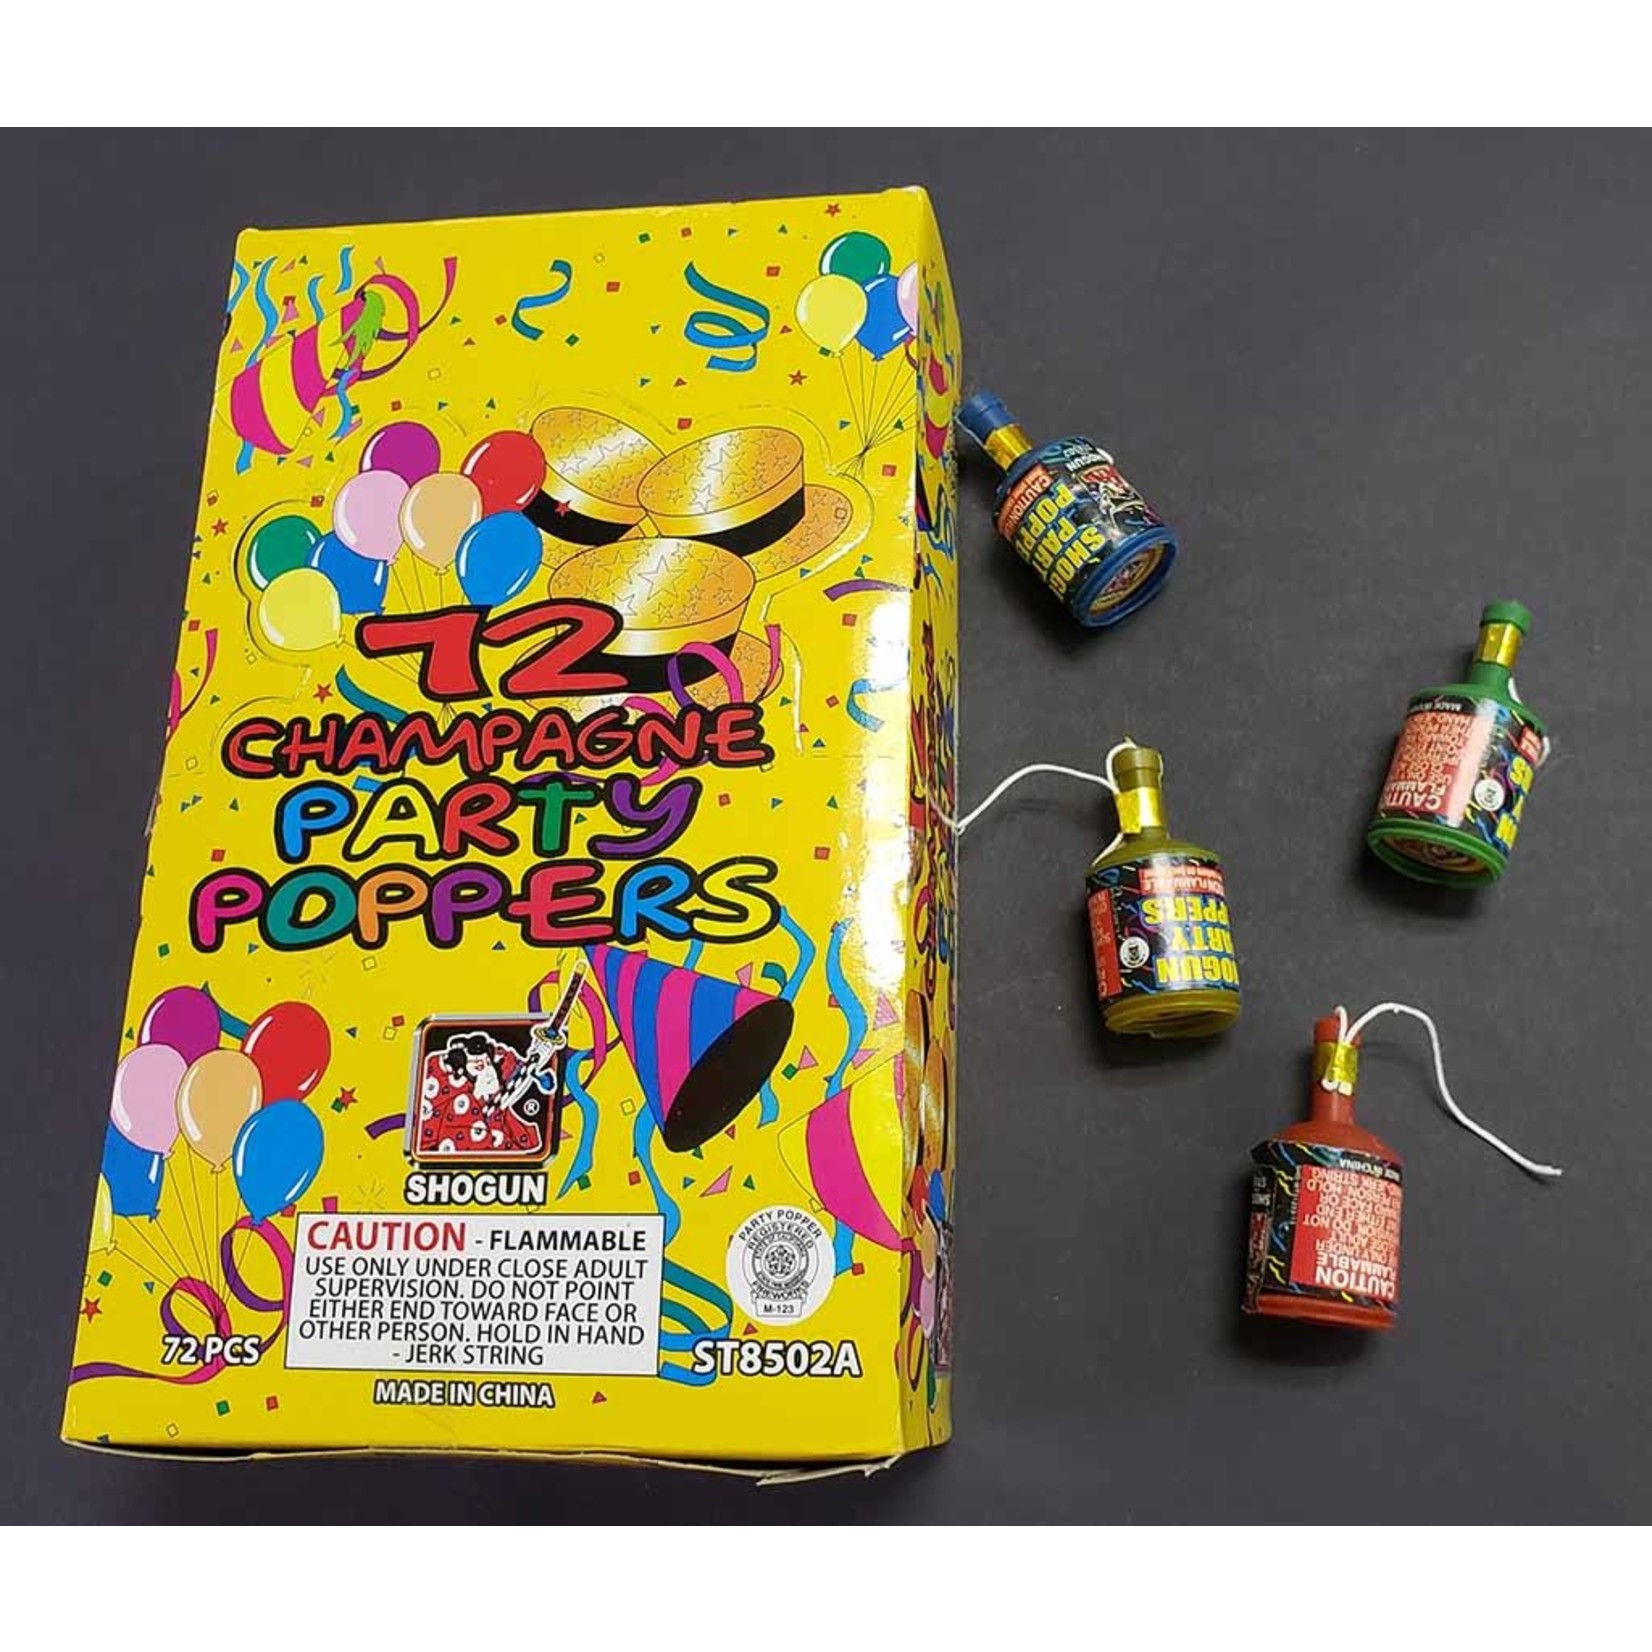 Hubbard Wholesale Champagne Party Poppers - 72ct.